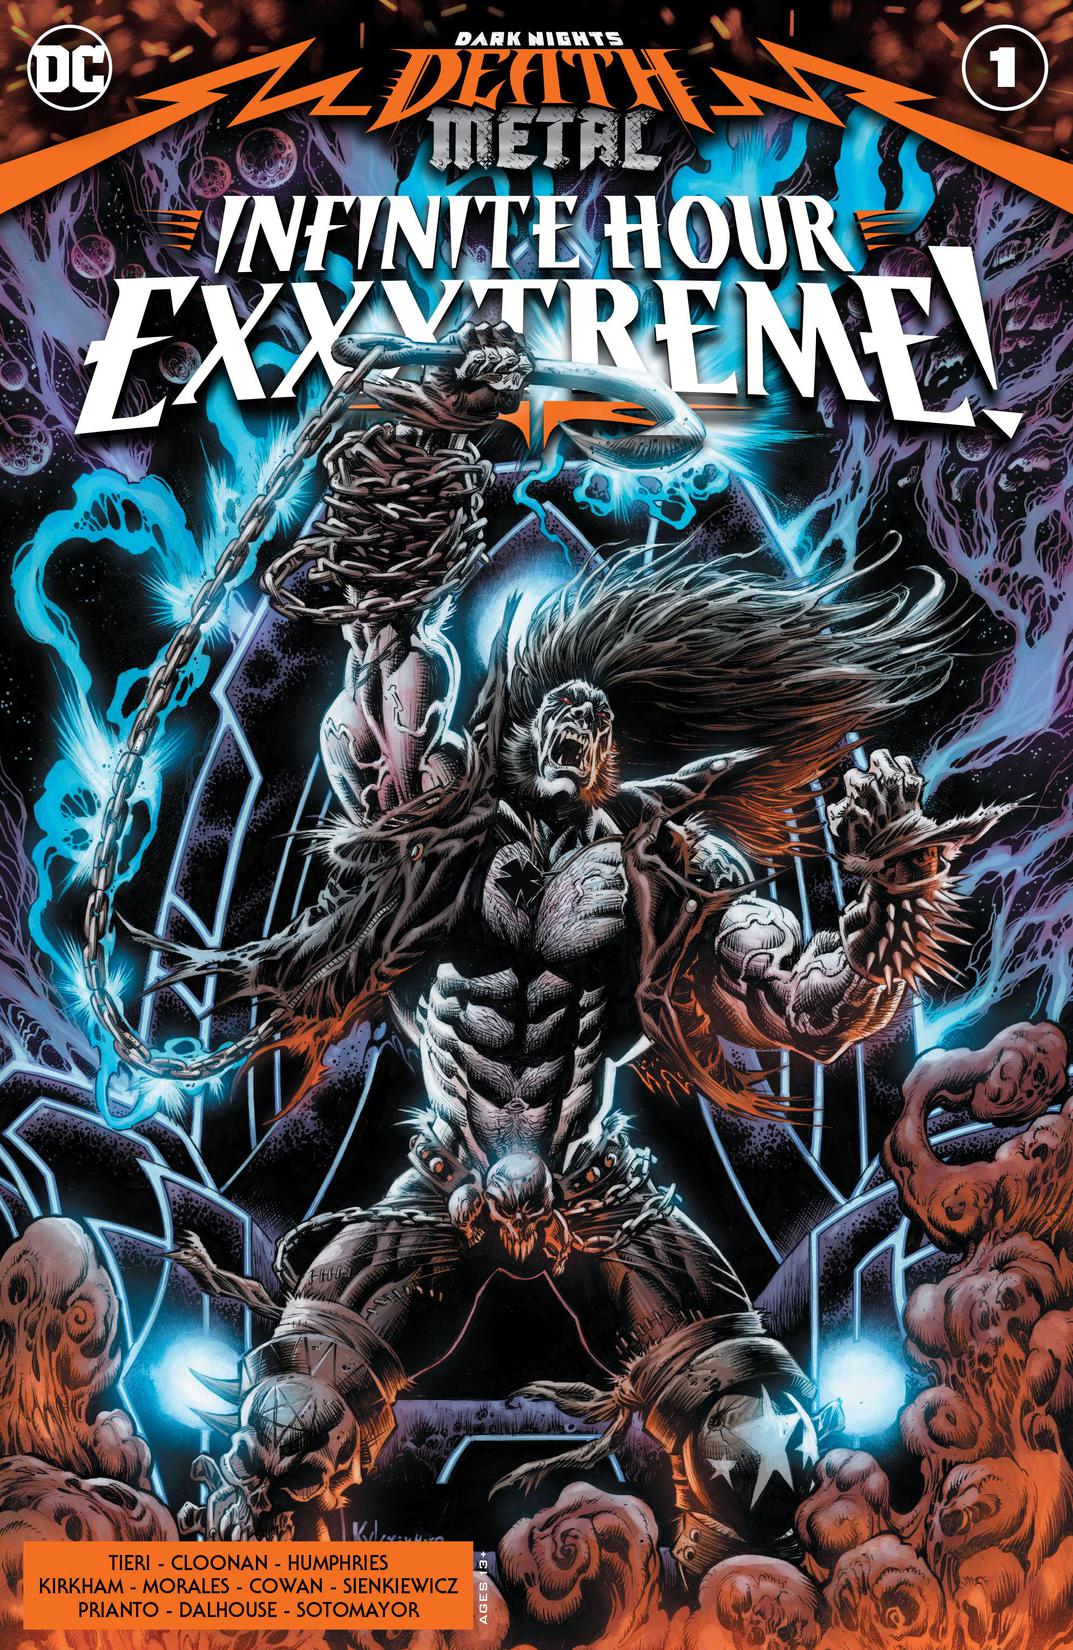 Dark Nights: Death Metal Infinite Hour Exxxtreme! #1 preview images